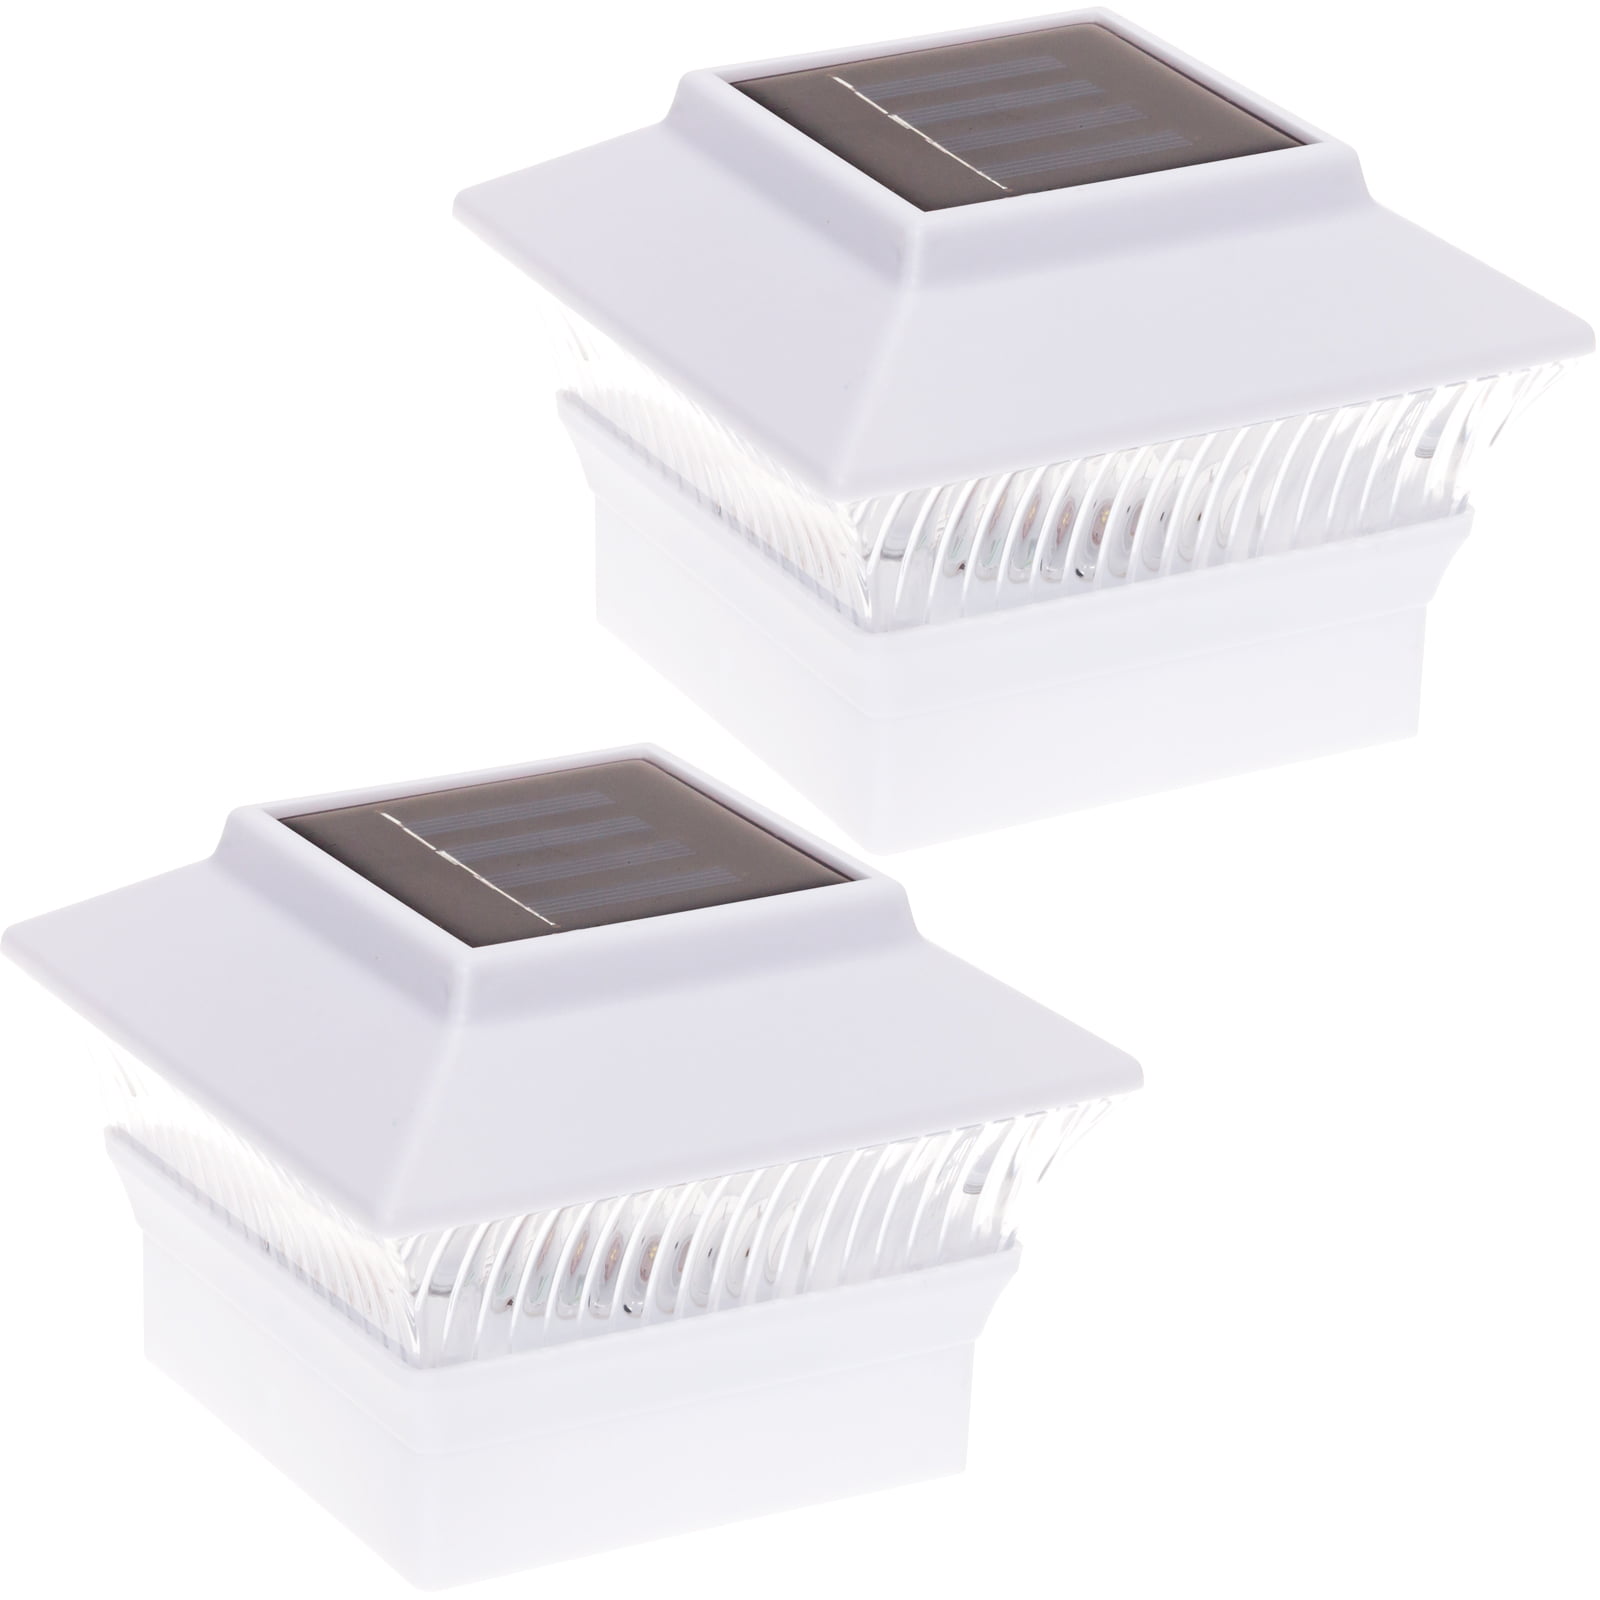 4-pk Solar 4x4 White Cap Light With 4 Bright White SMD LED For PVC Wood Posts 